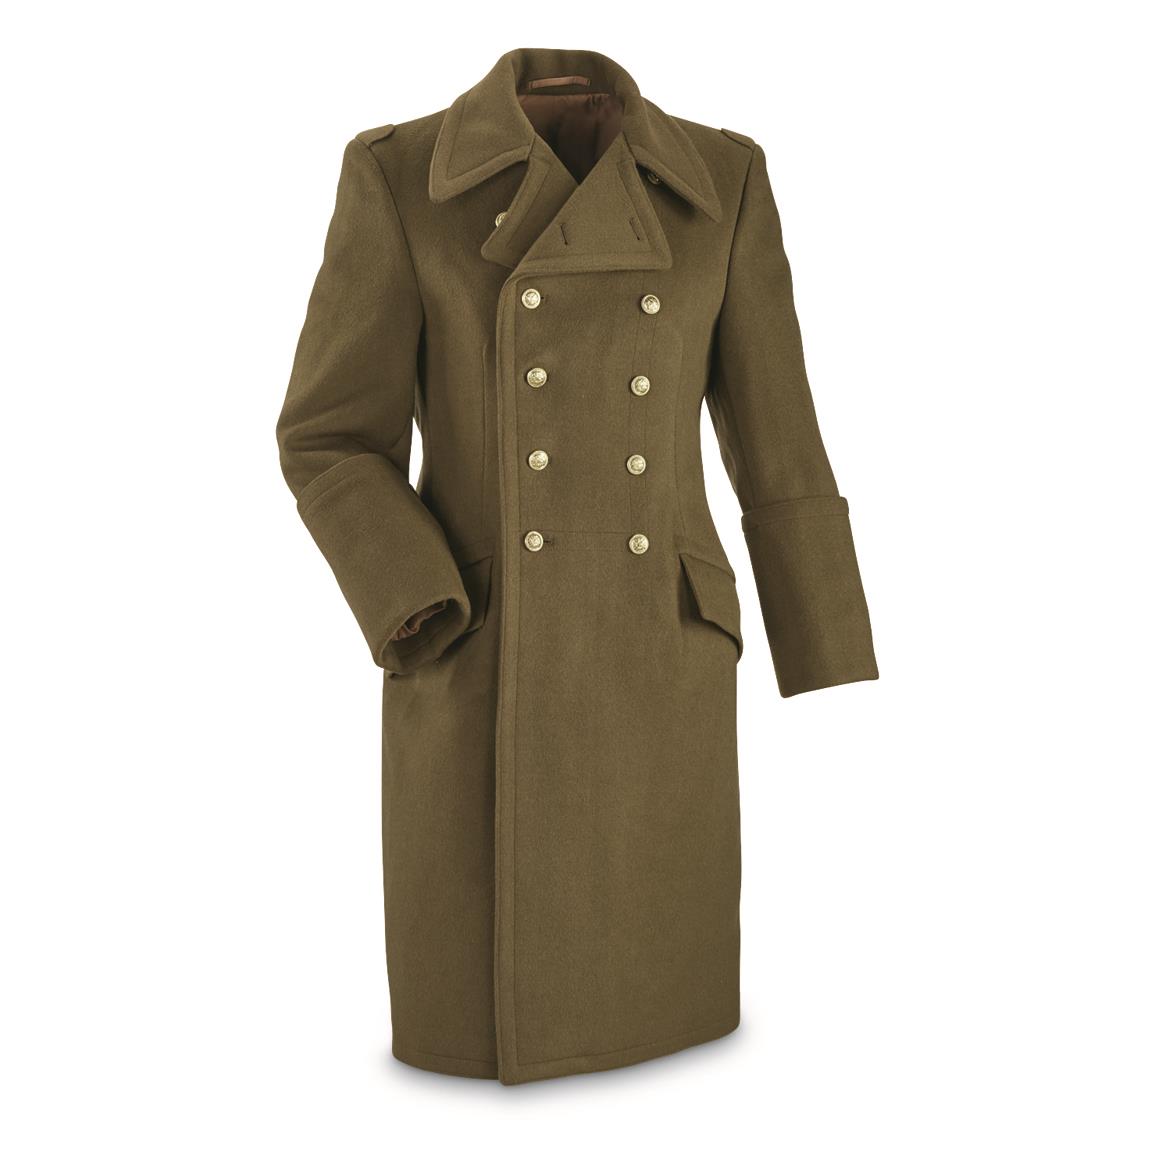 Hungarian Military Surplus Double Breasted Trench Coat, New